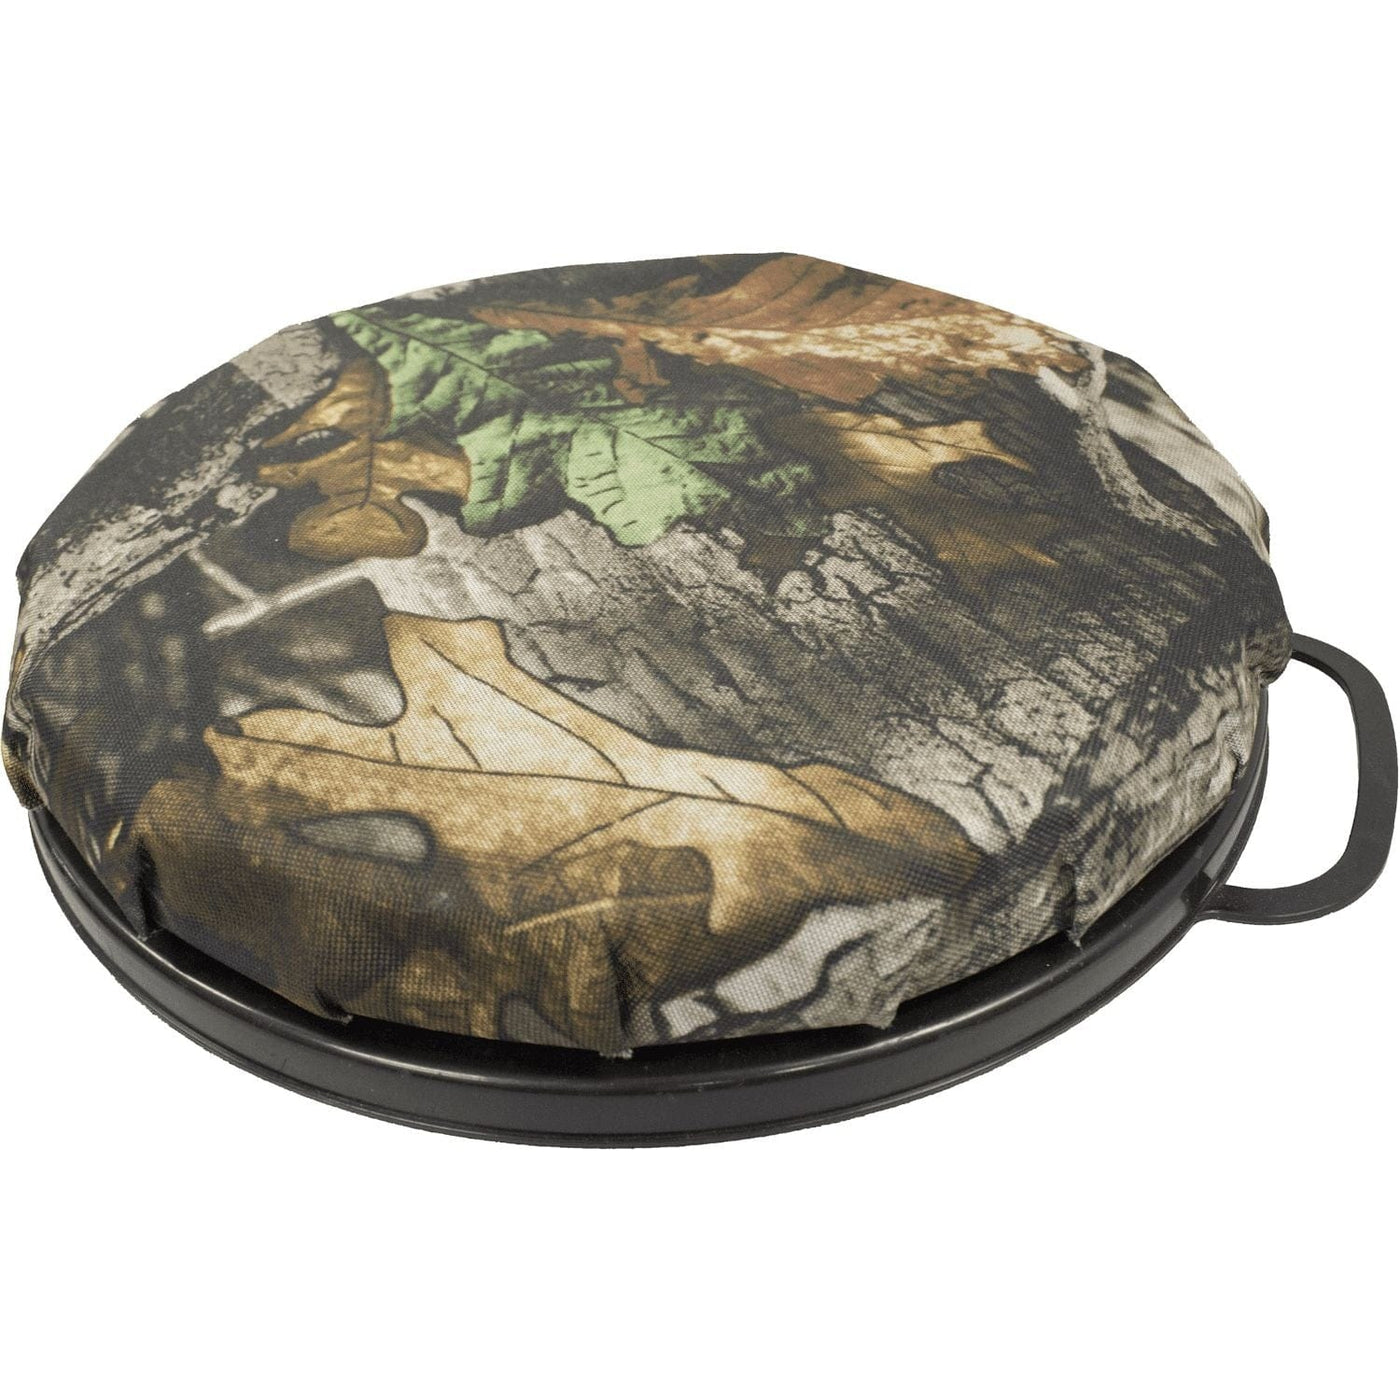 HME Products HME Swivel Seat Hunting